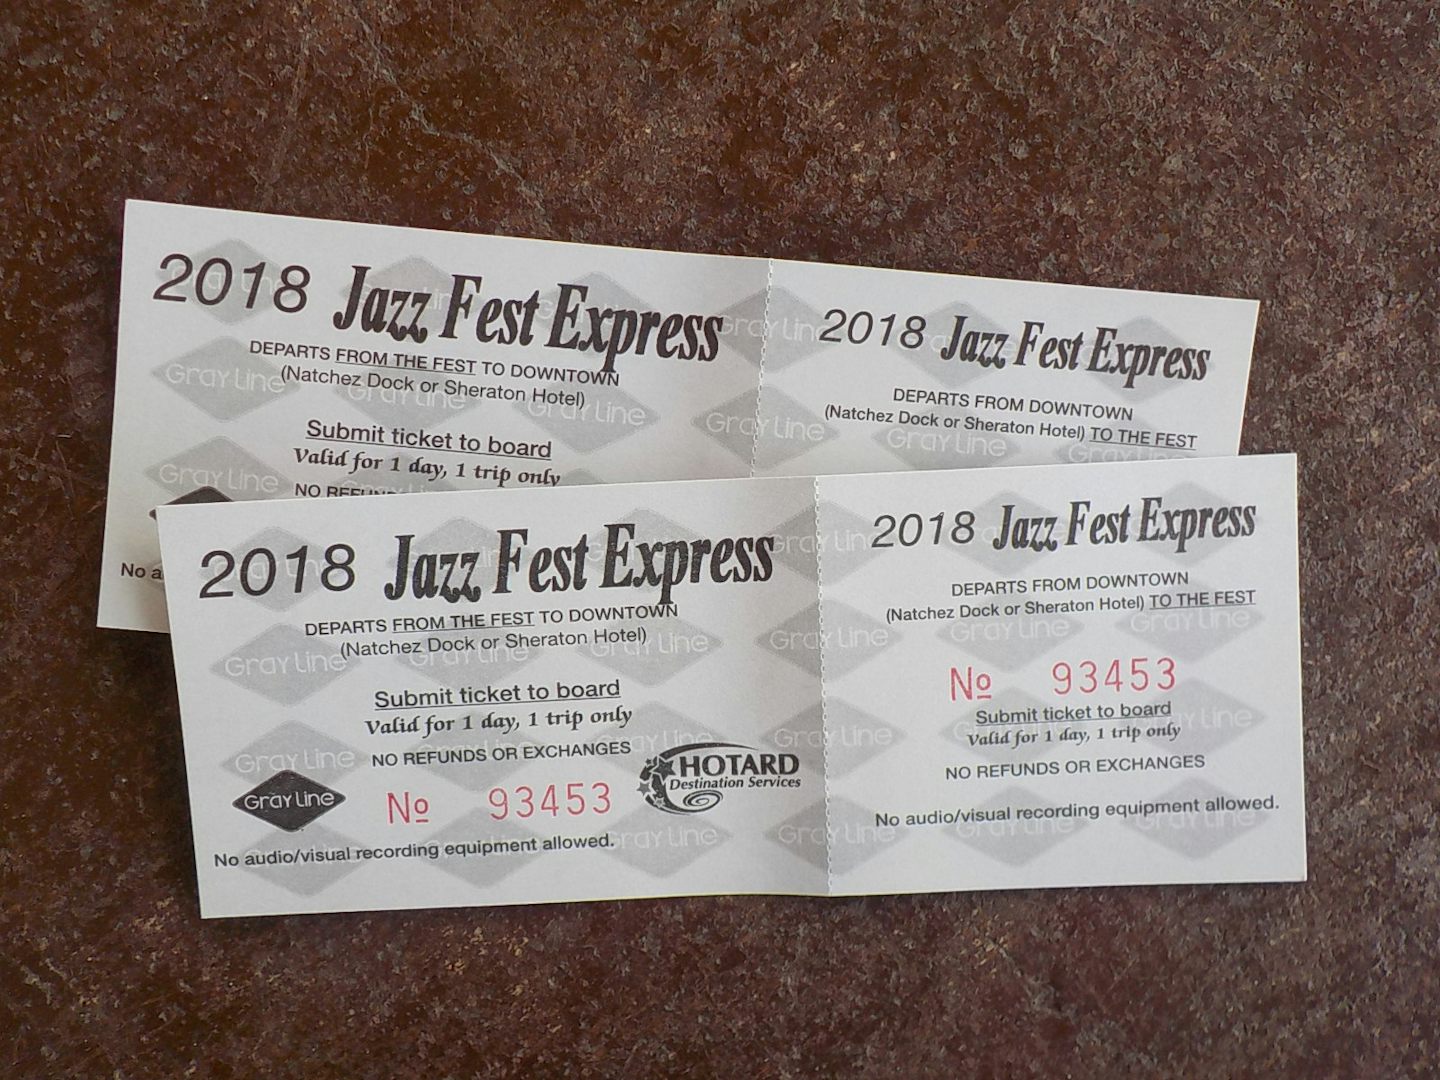 Our Jazz Fest tickets